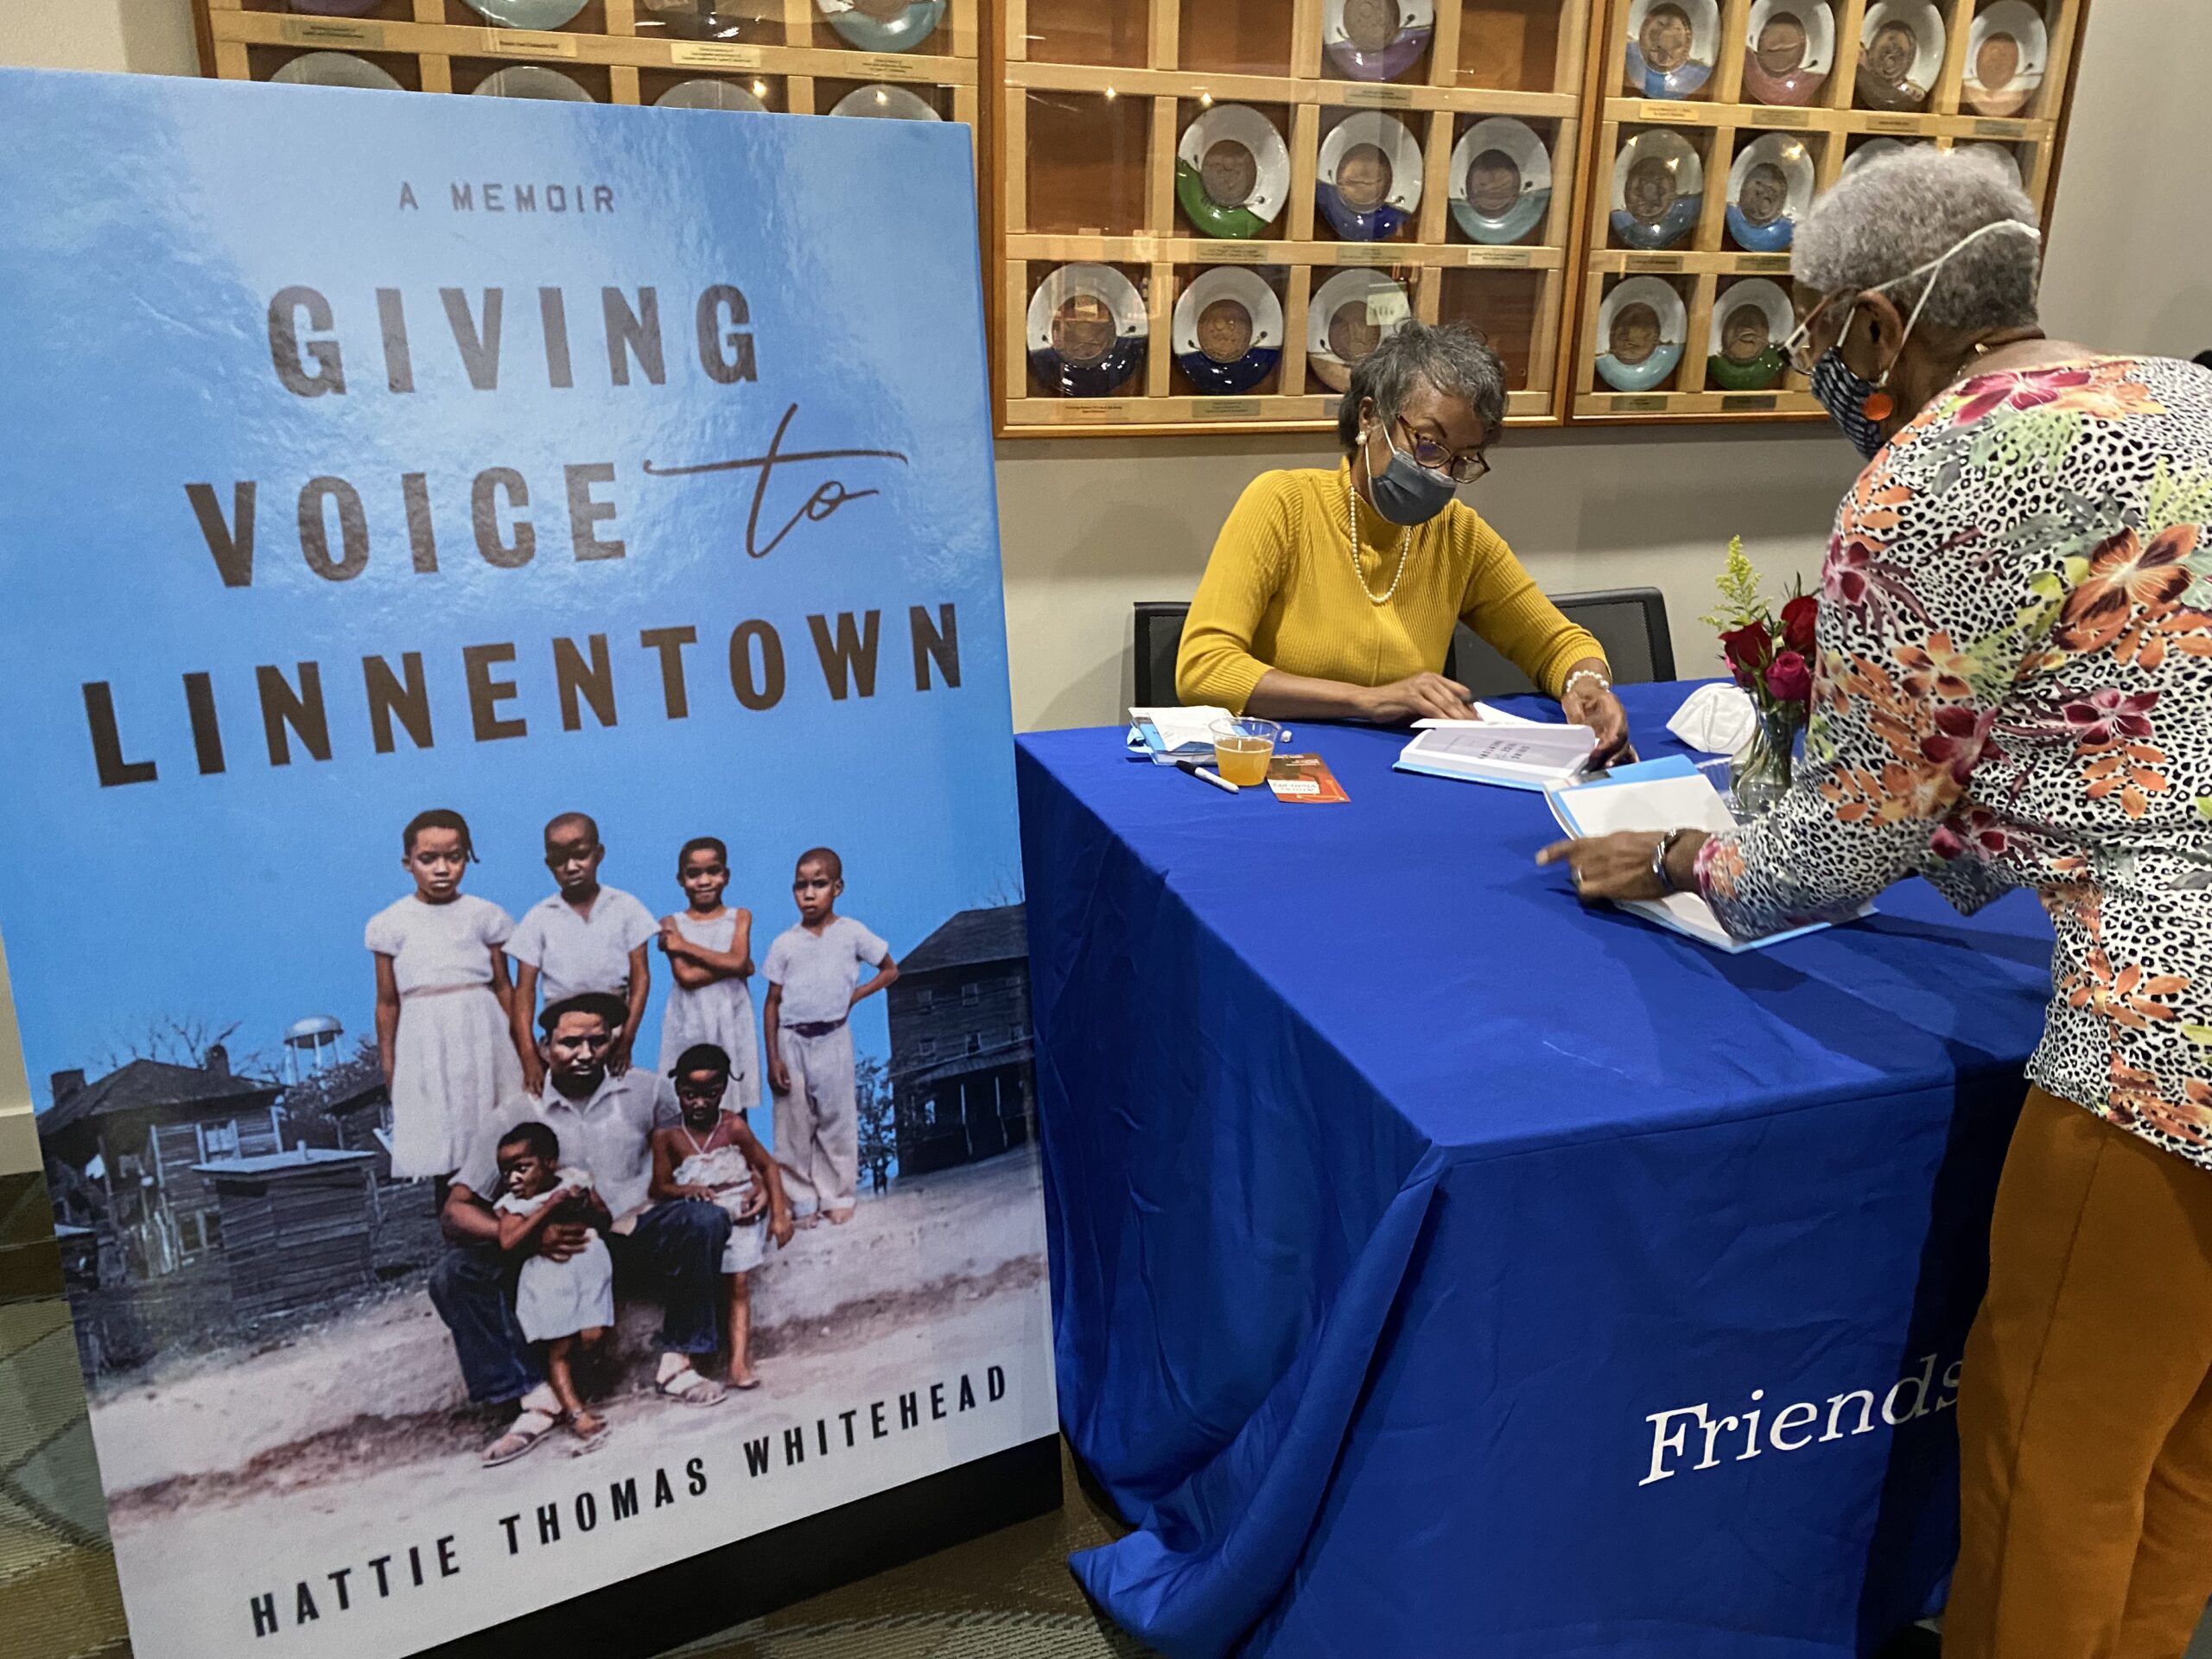 Linnentown descendant Hattie Thomas Whitehead signs a copy of her memoir for a book launch attendee.